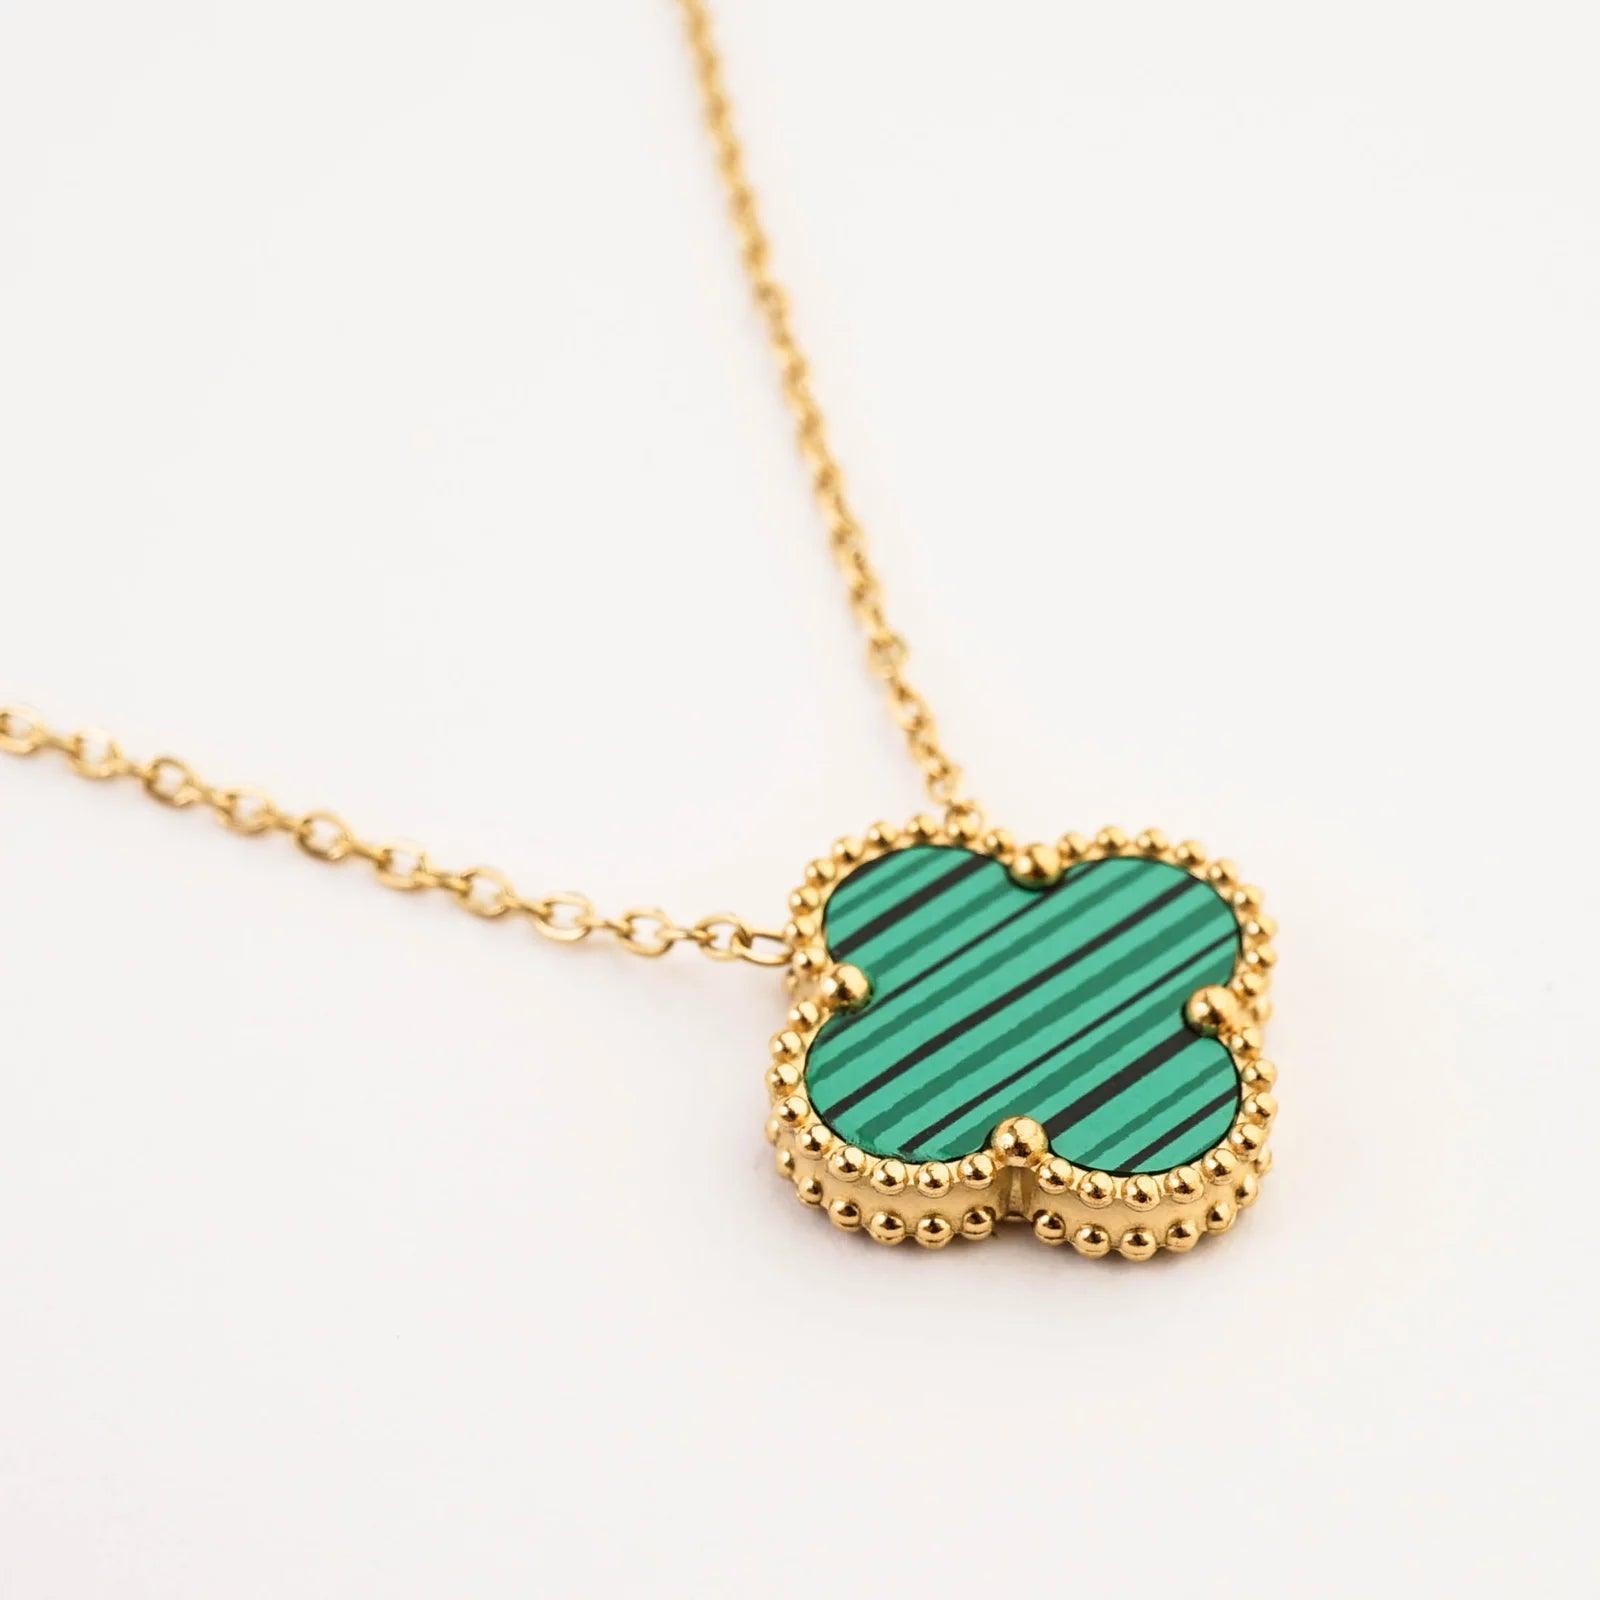 GREEN AND GOLD FOUR LEAF CLOVER NECKLACE - Lynott Jewellery